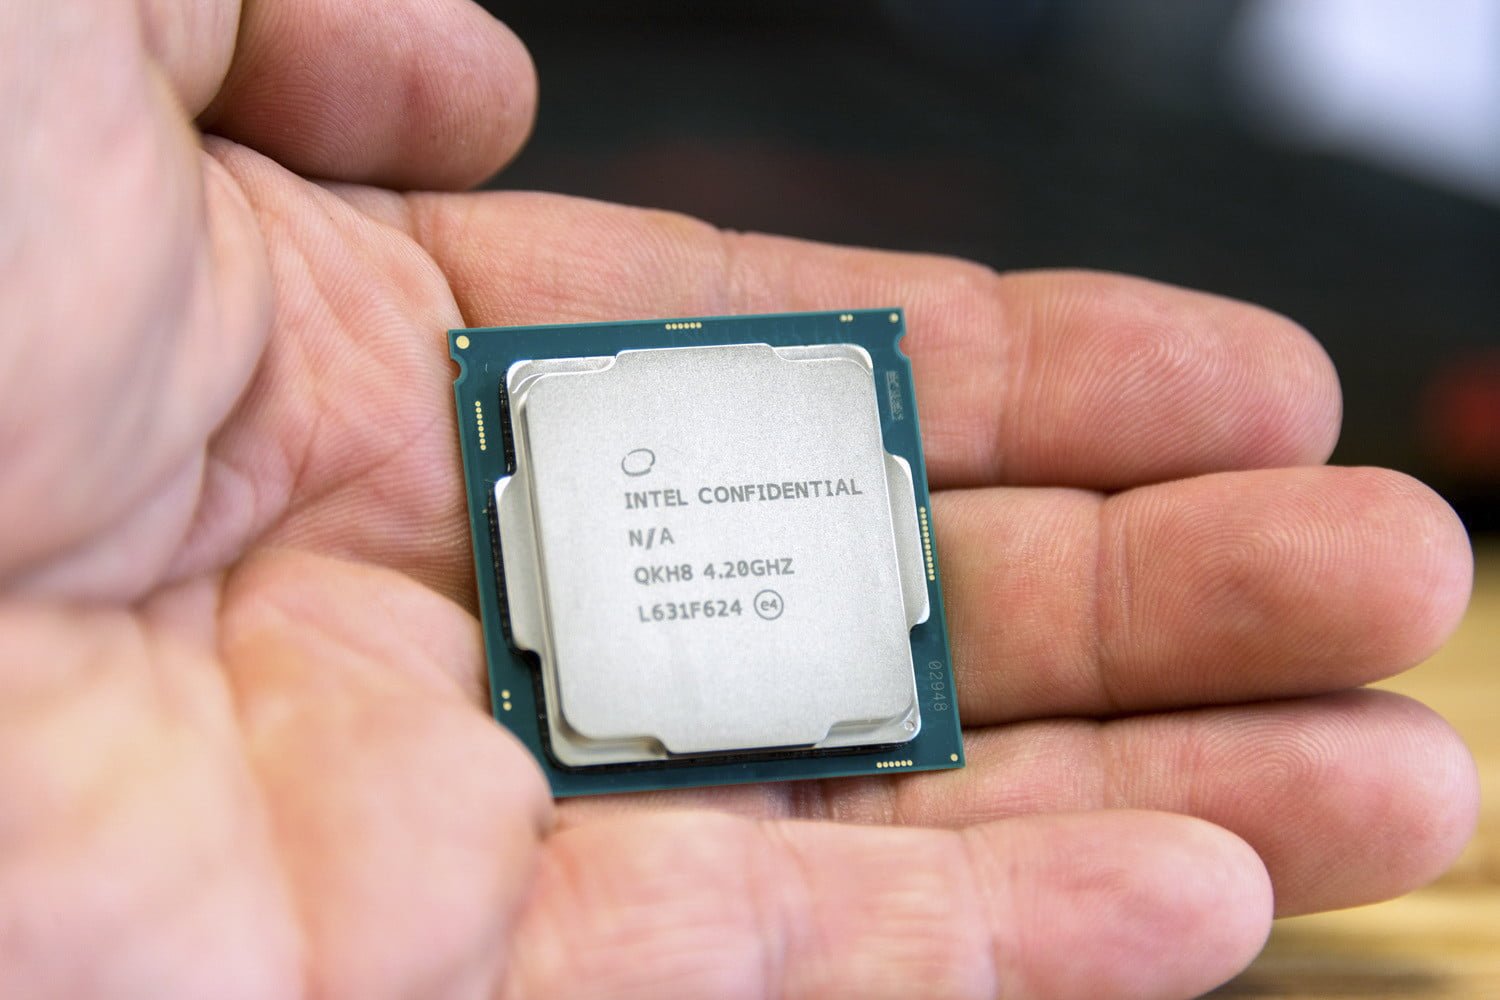 How to Identify the Model of Your Intel Processor